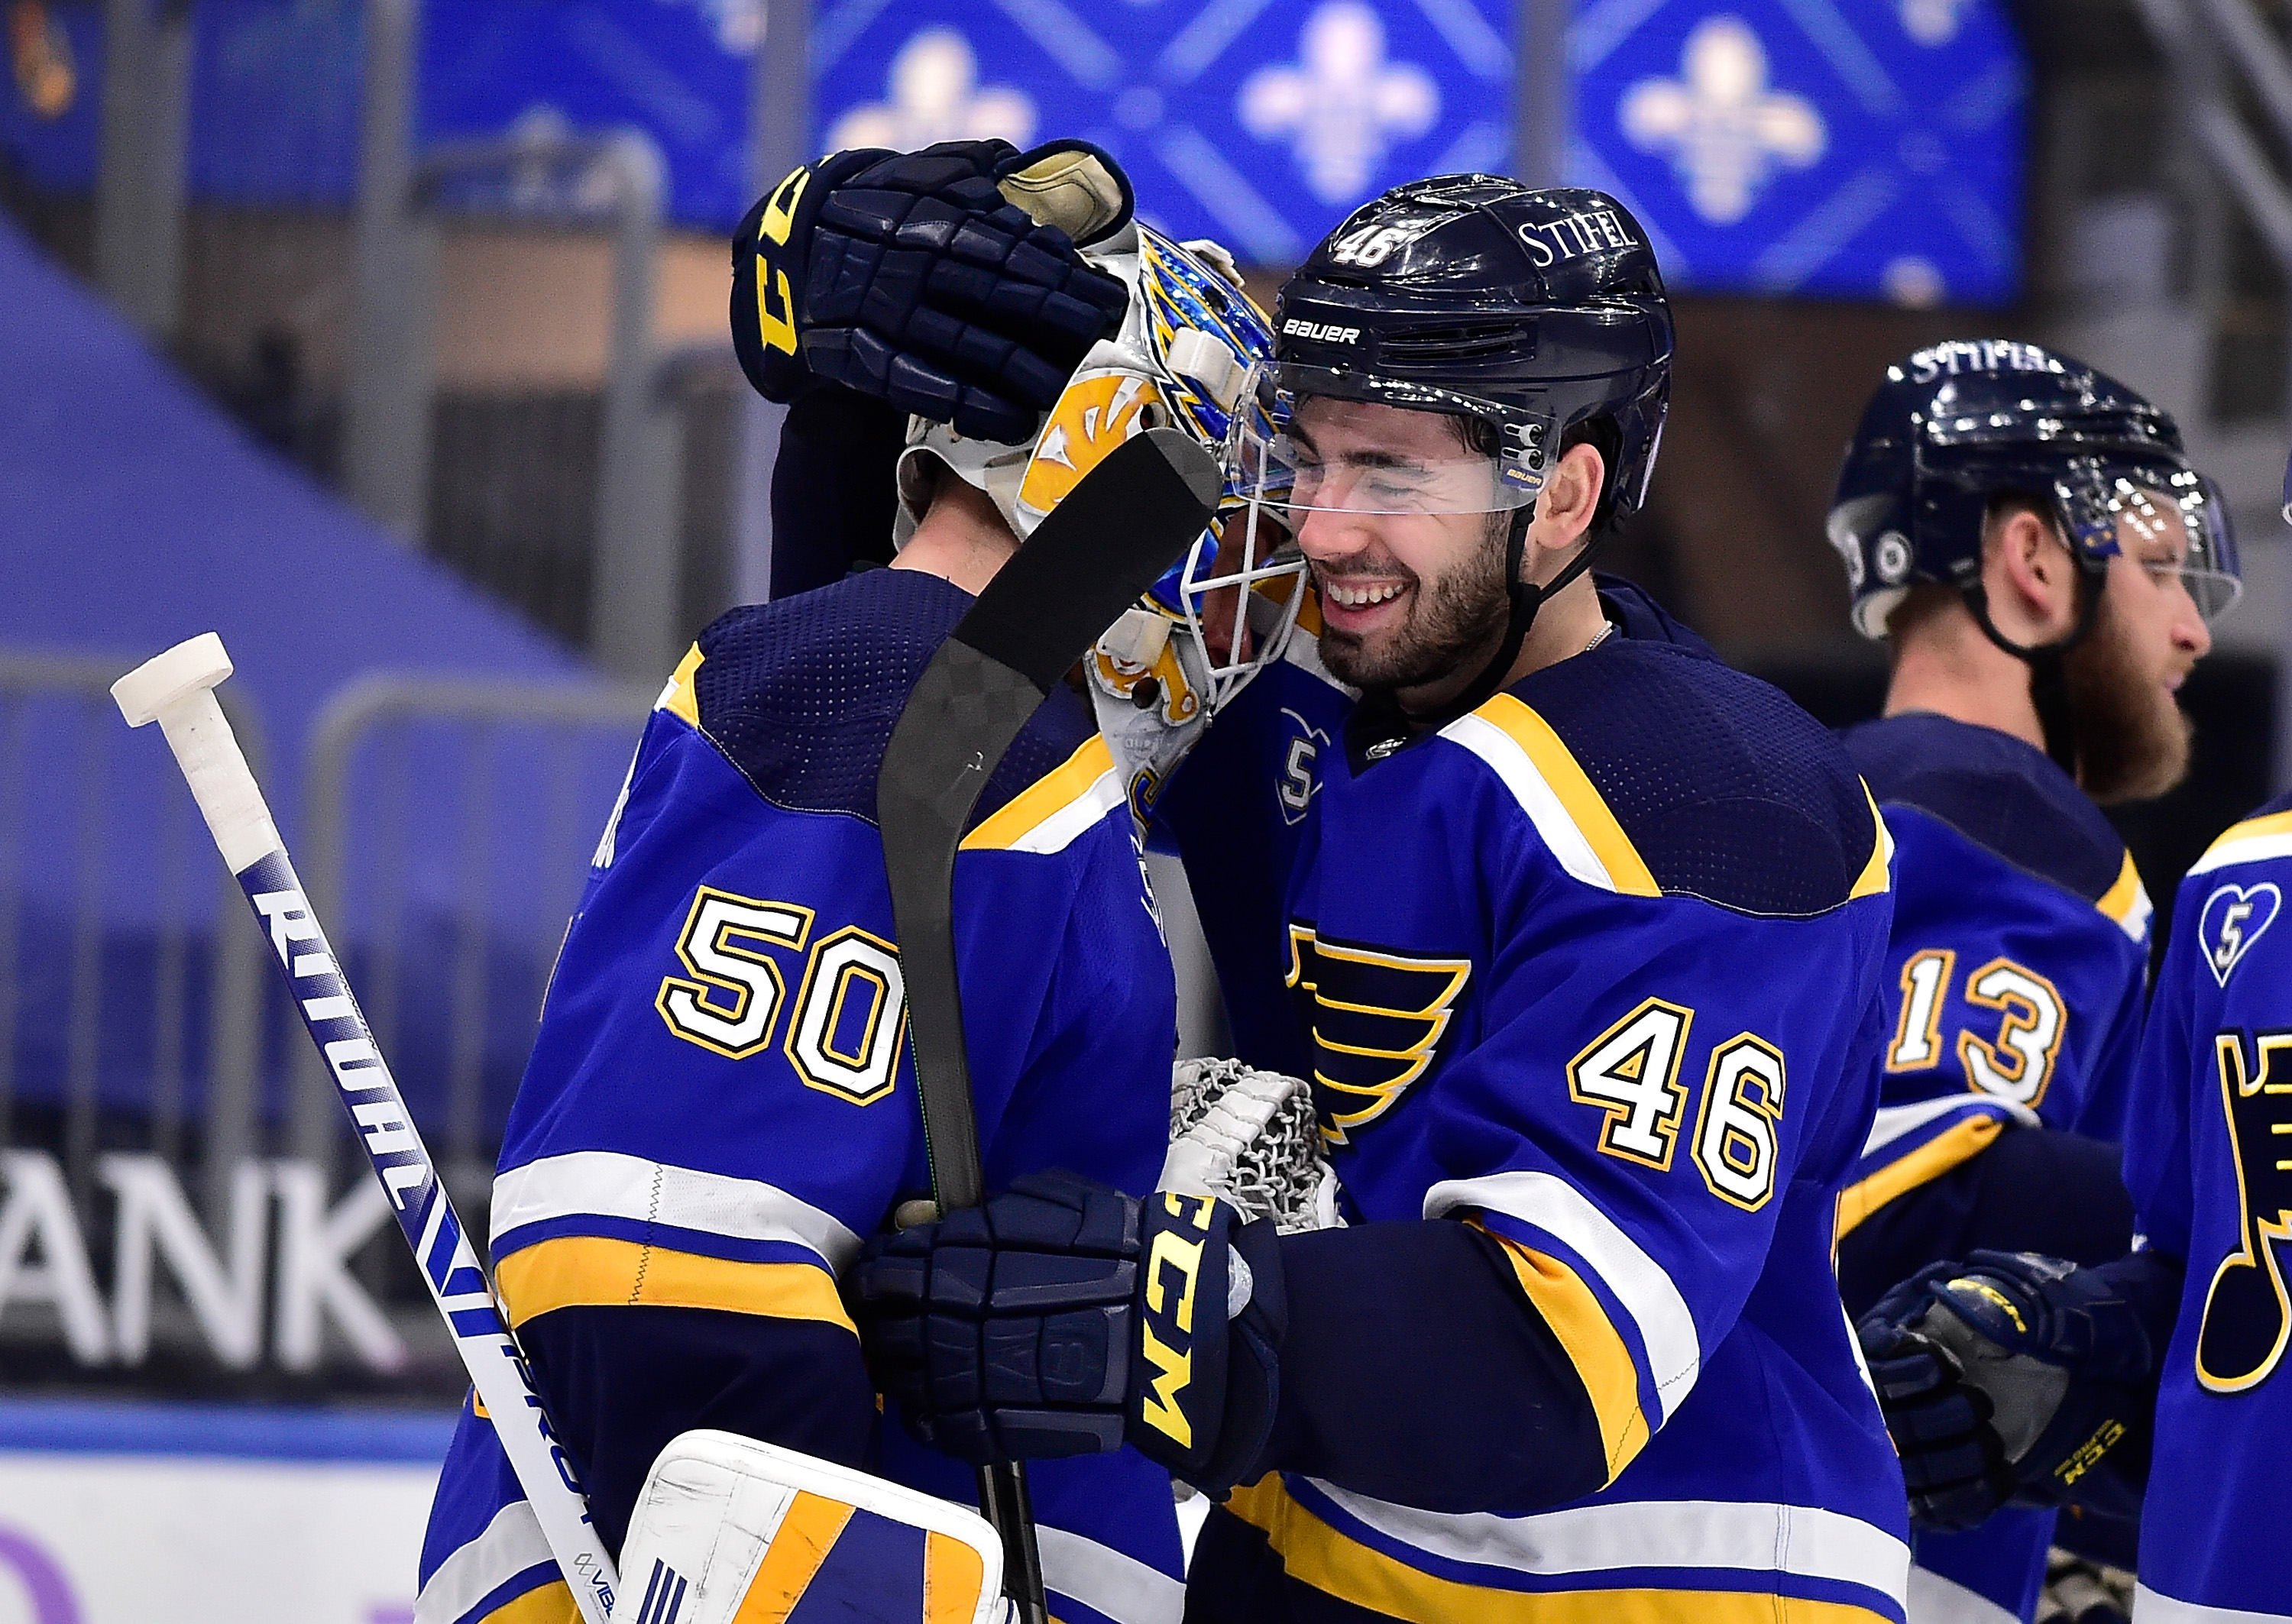 NHL: Vegas Golden Knights at St. Louis Blues